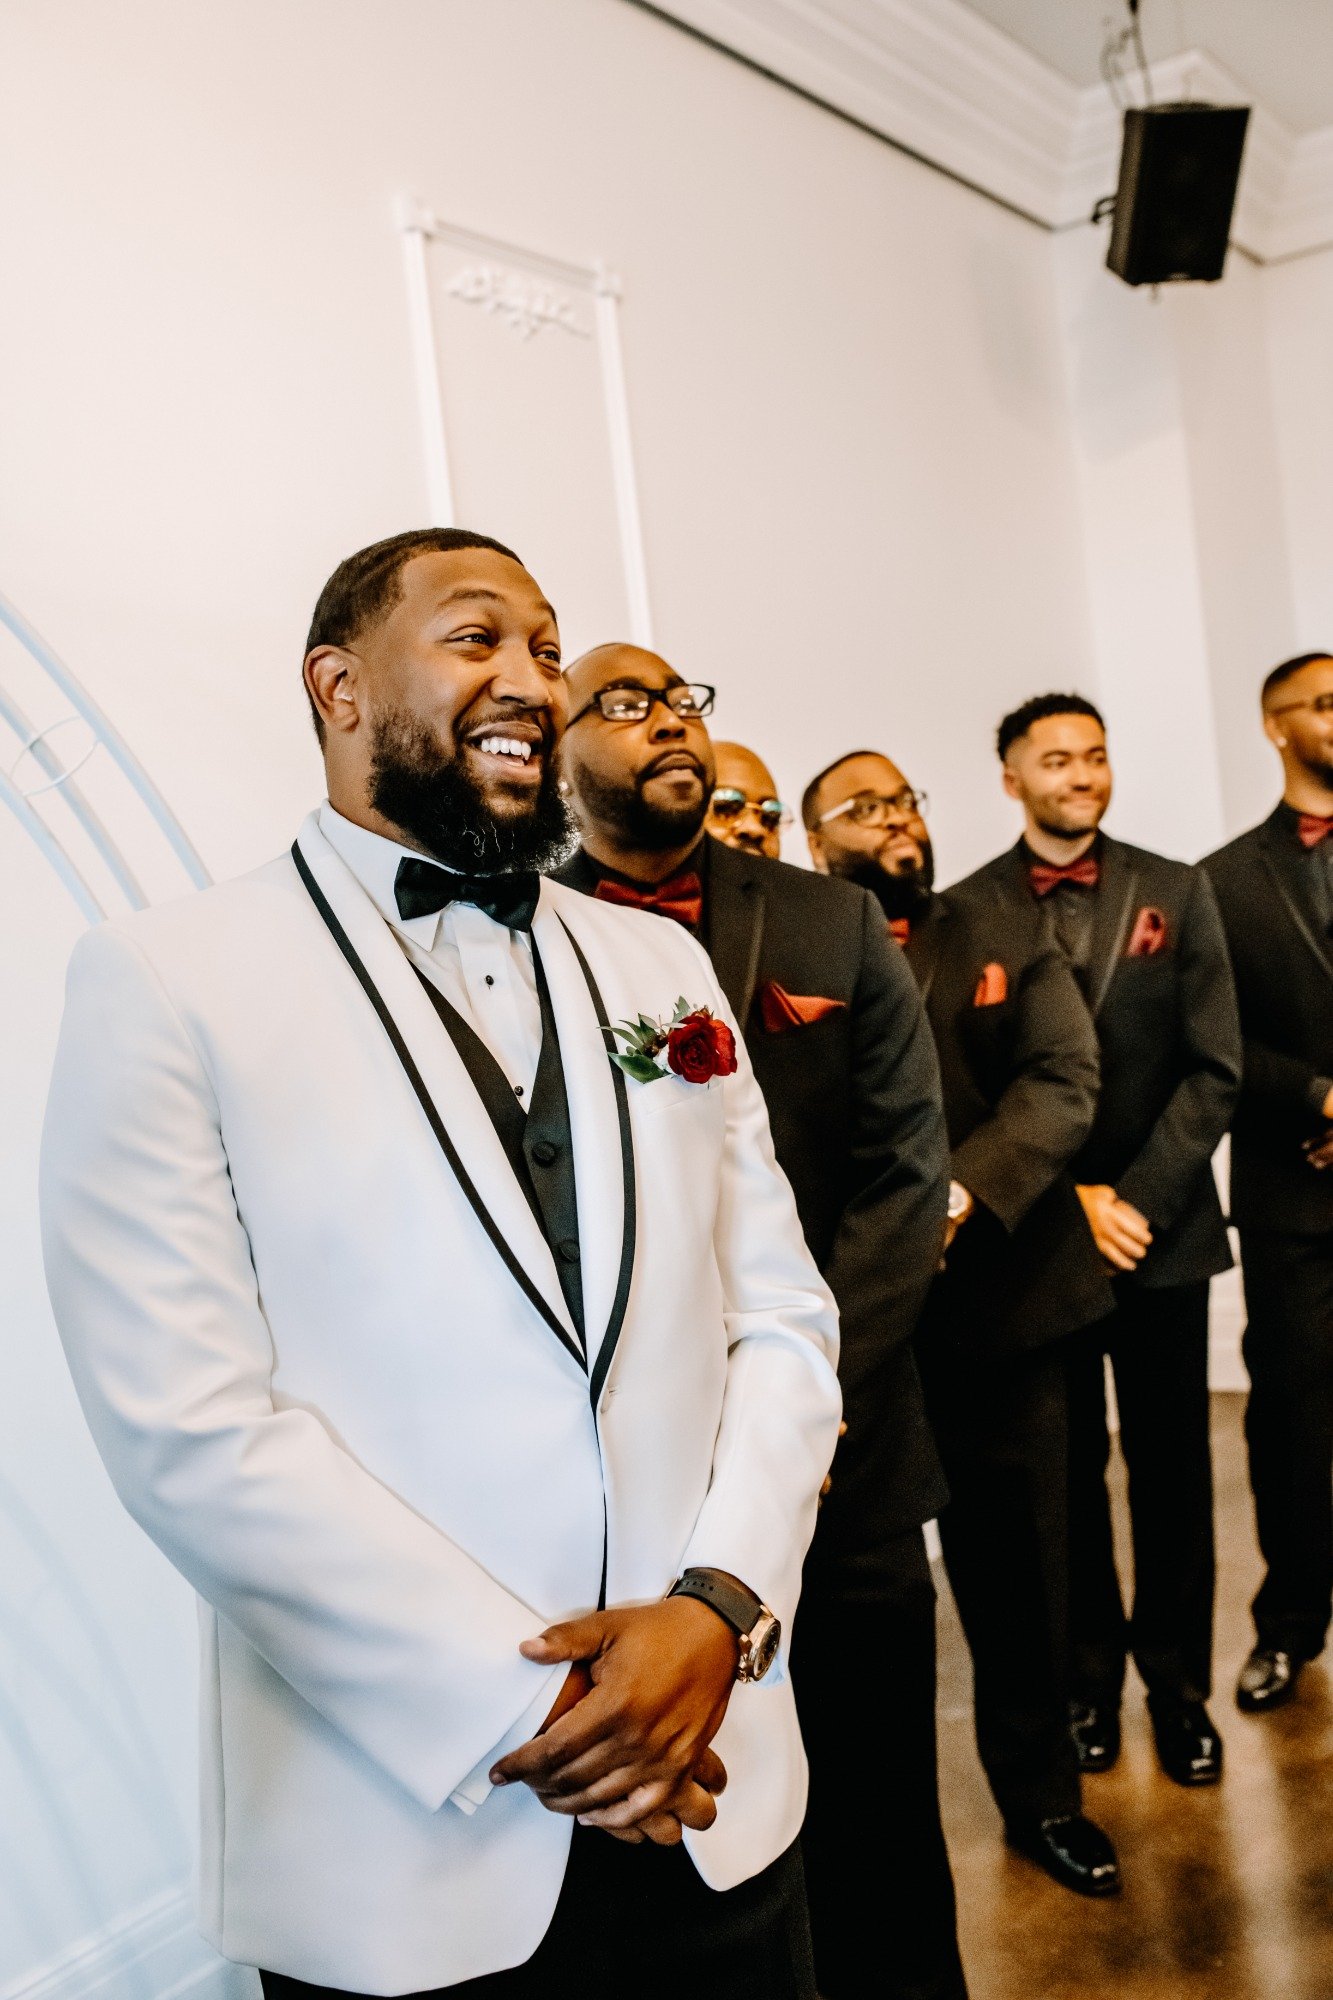 Groom excited for wedding